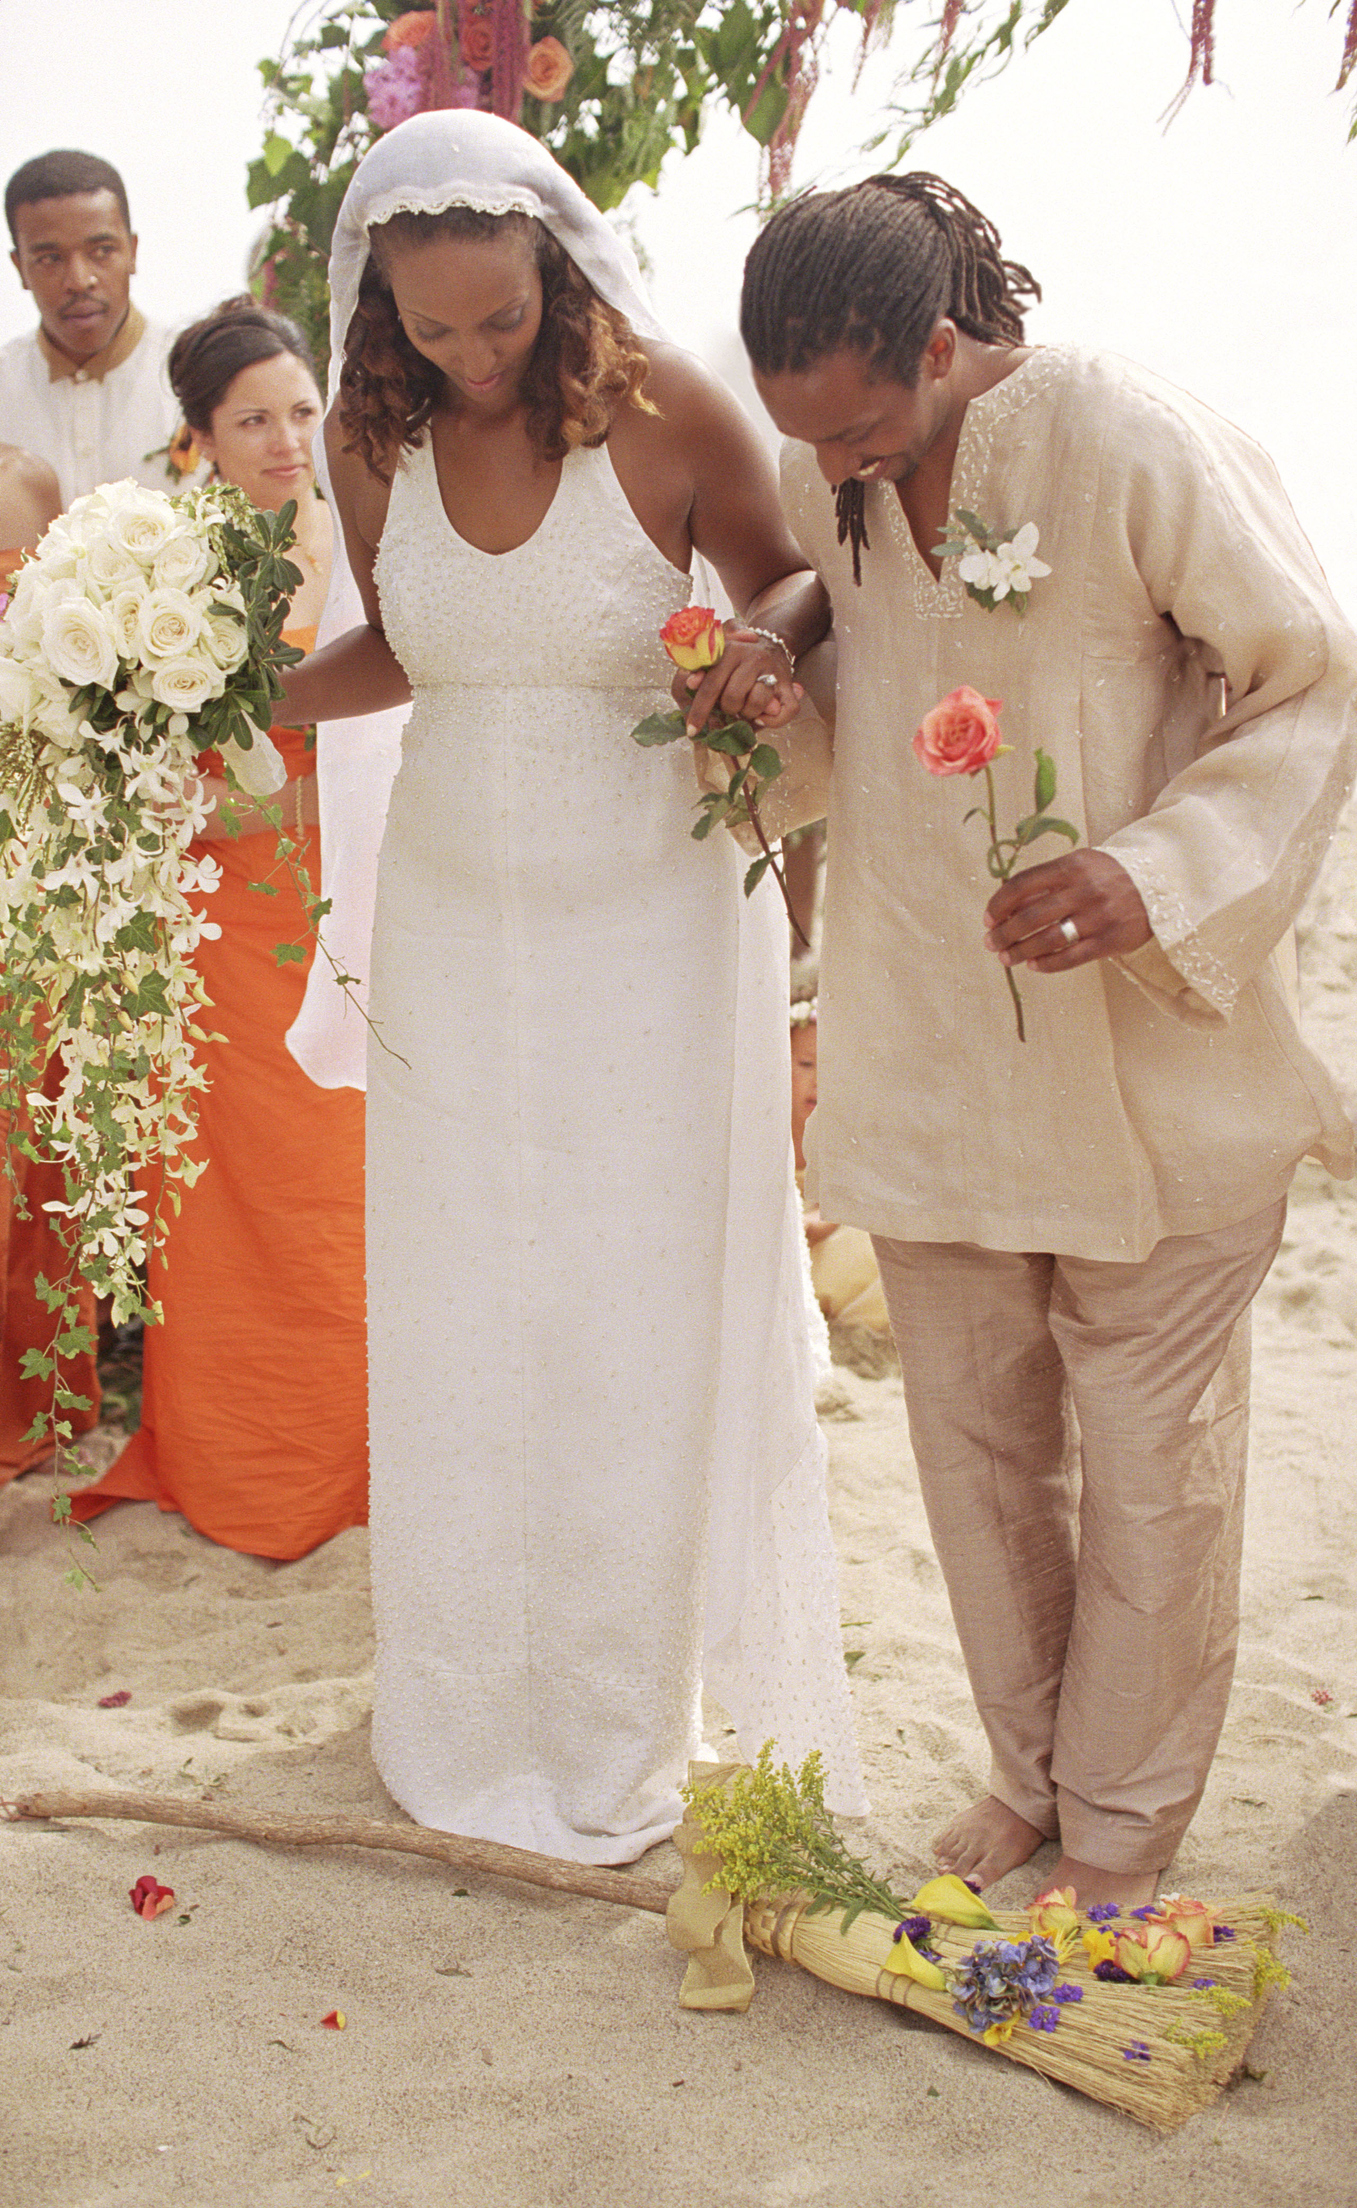 Couple jumping broom at wedding ceremony